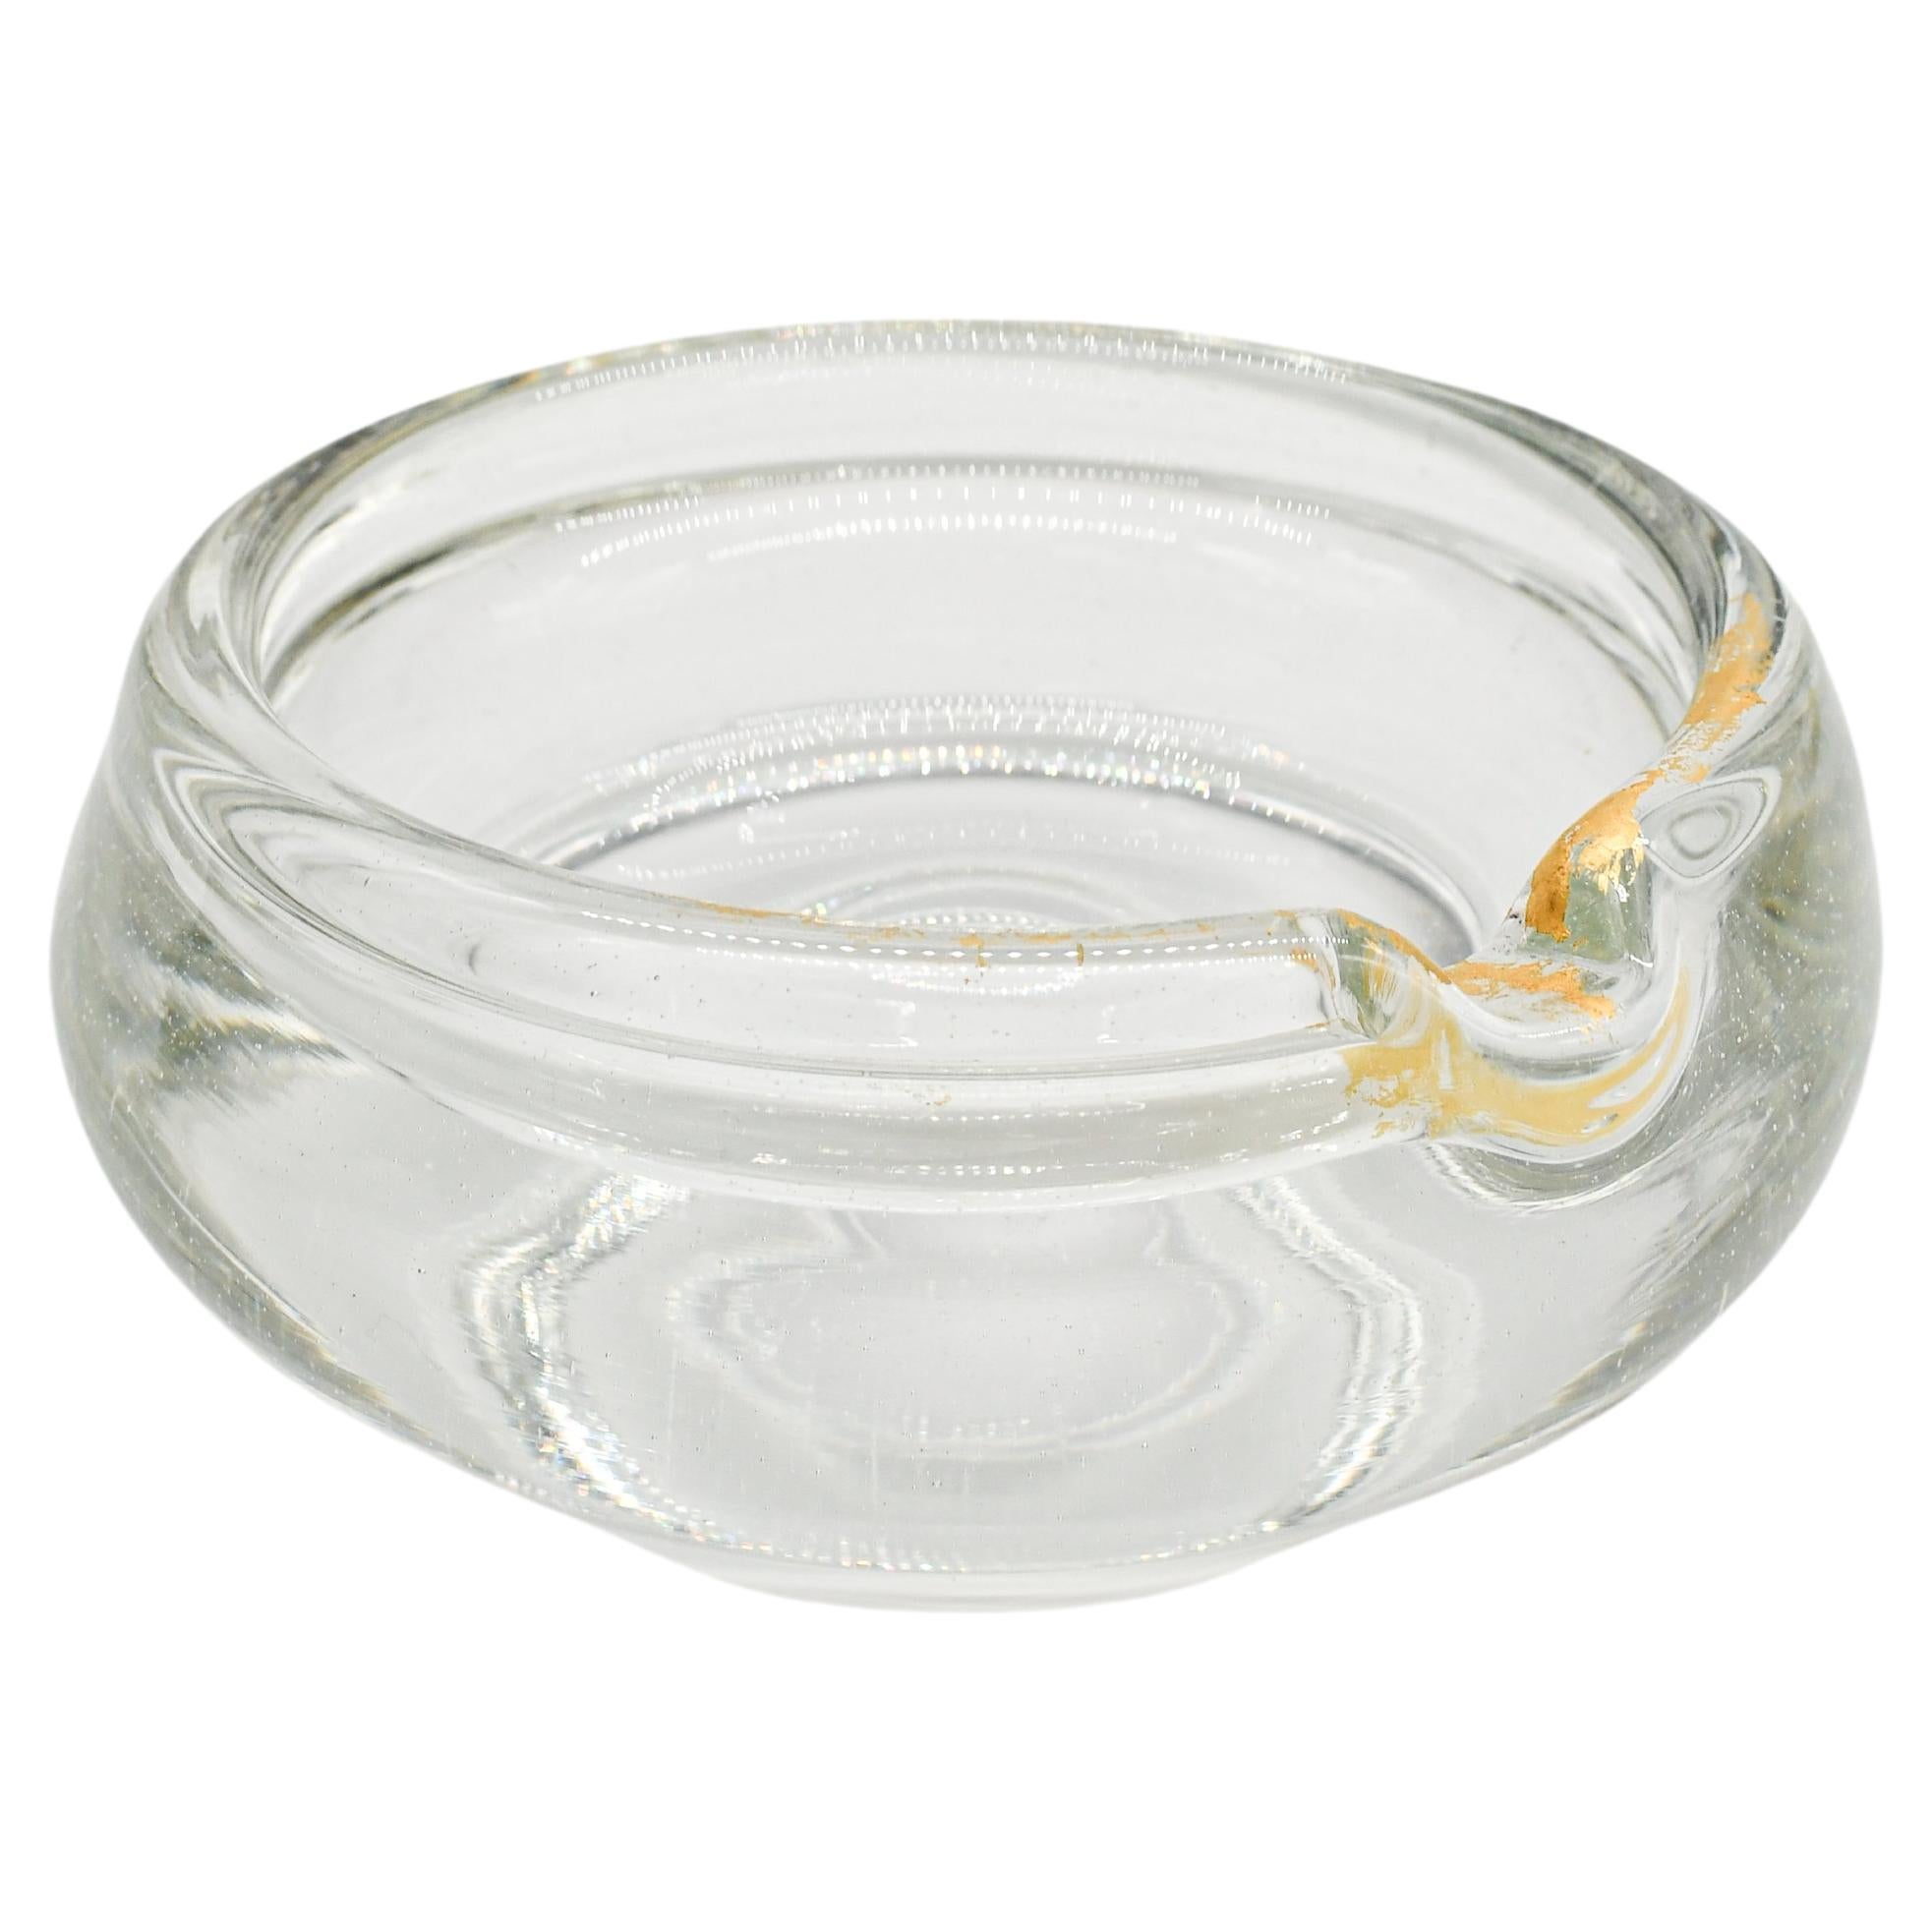 Contemporary 24K gold and glass Cigar Ashtray  by Laura Sattin